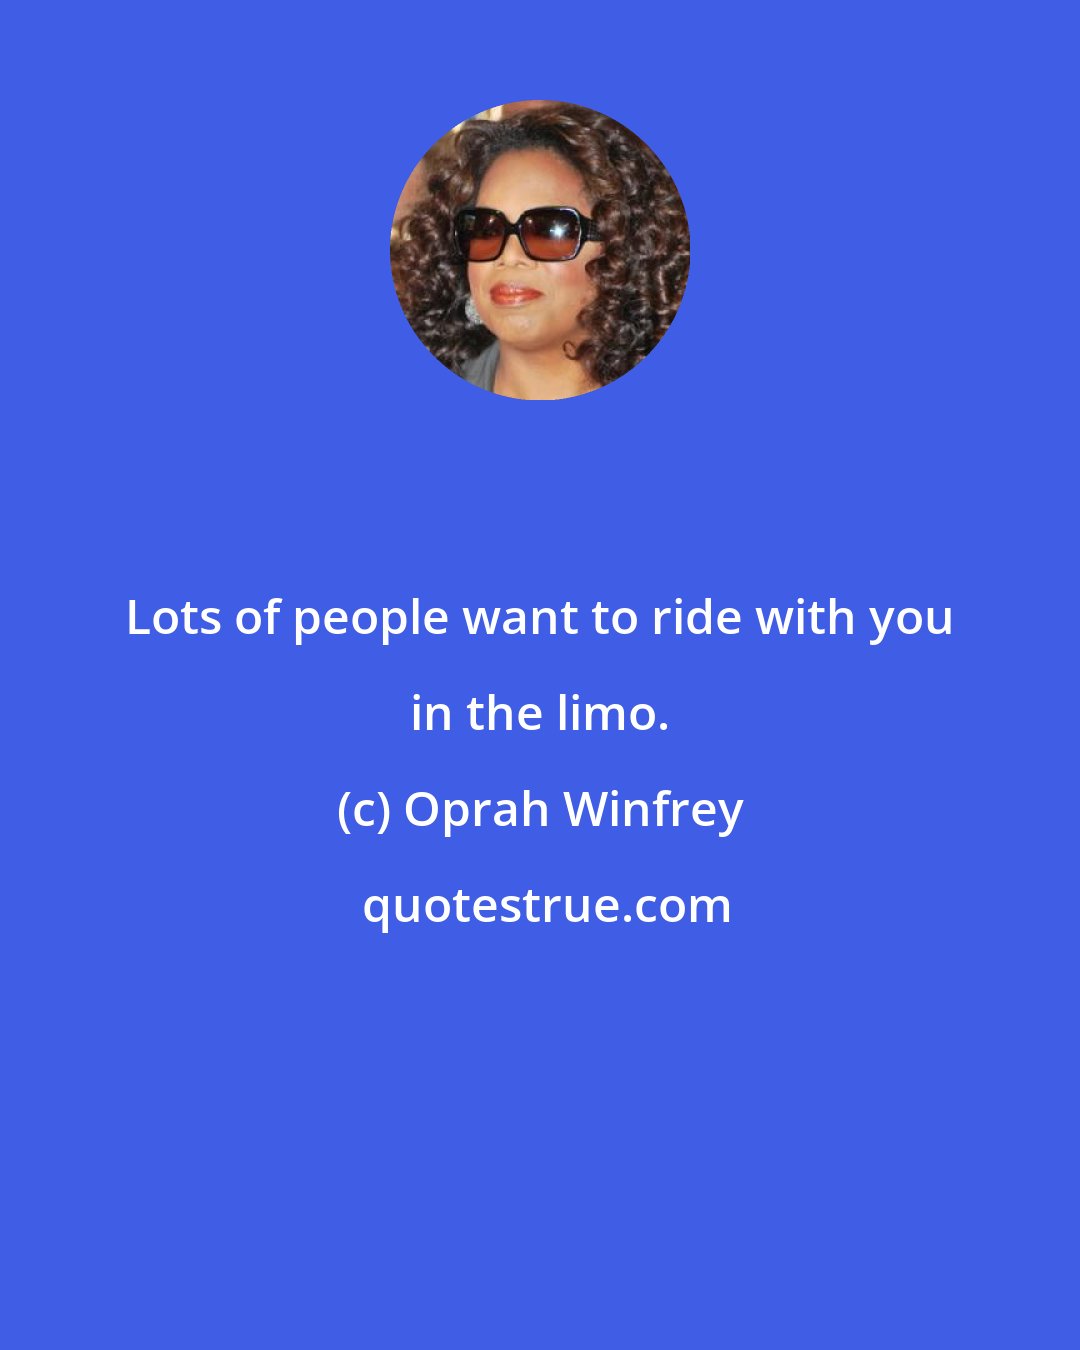 Oprah Winfrey: Lots of people want to ride with you in the limo.